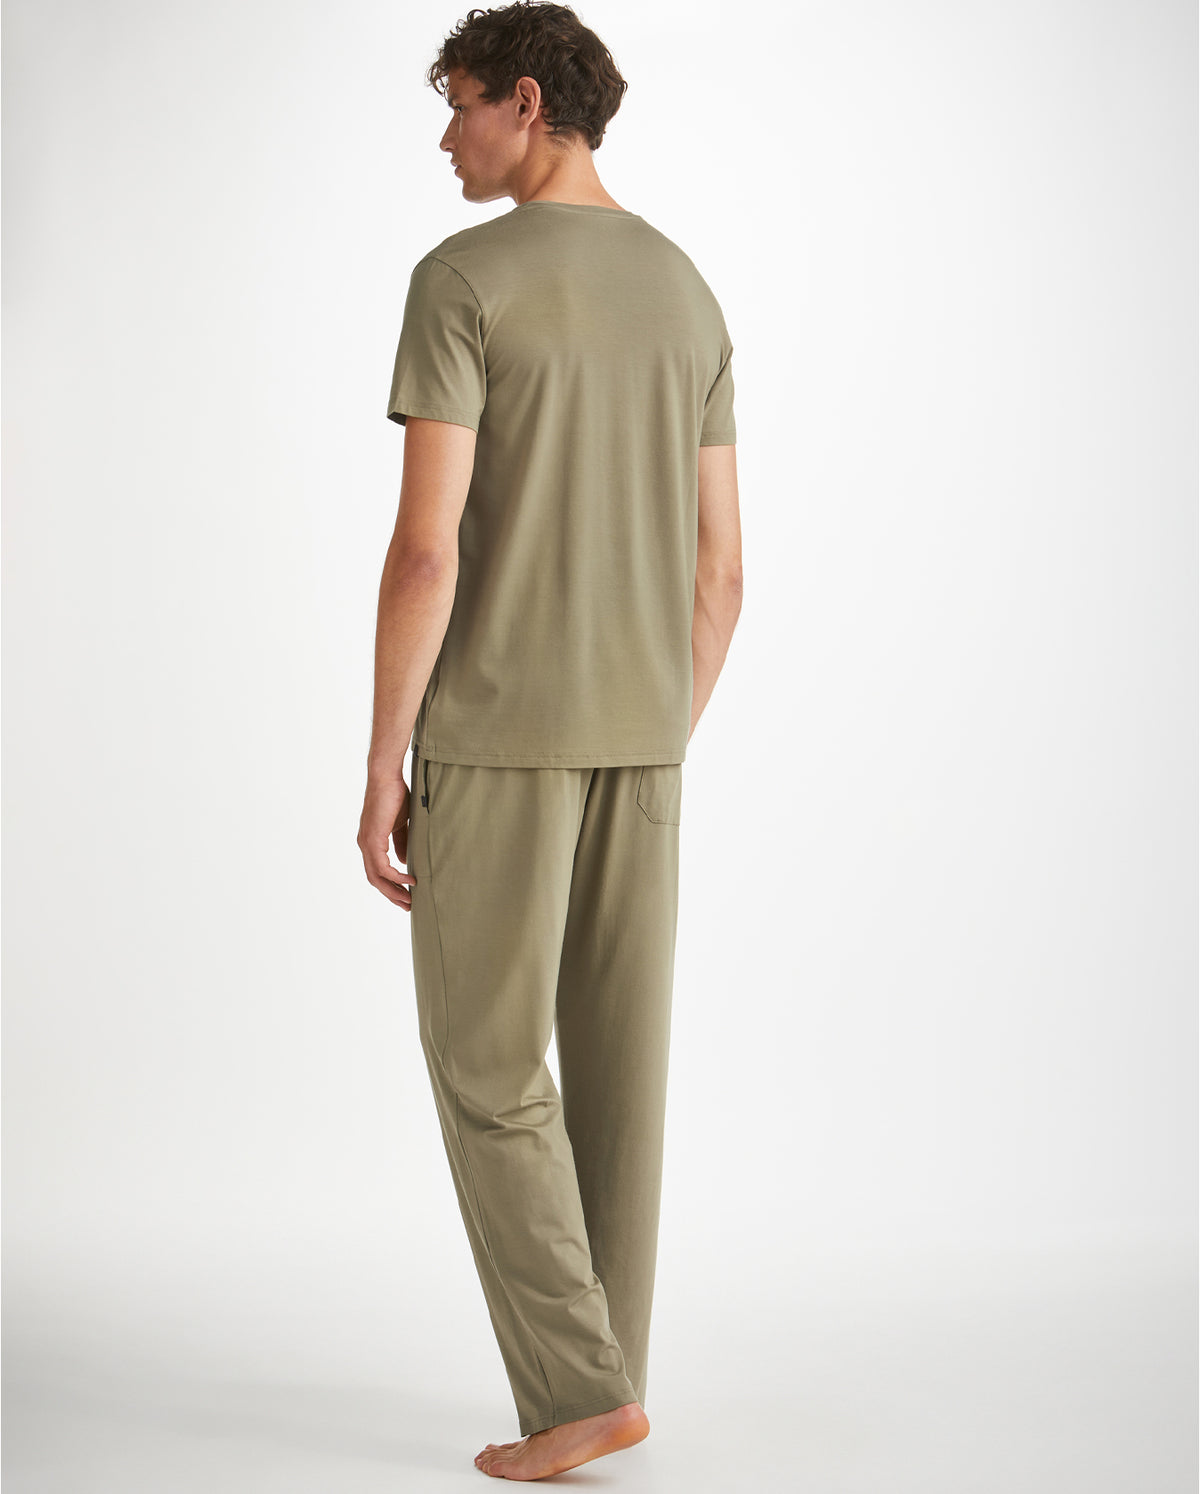 Basel Stretch Modal Pull On Lounge Pant - Olive